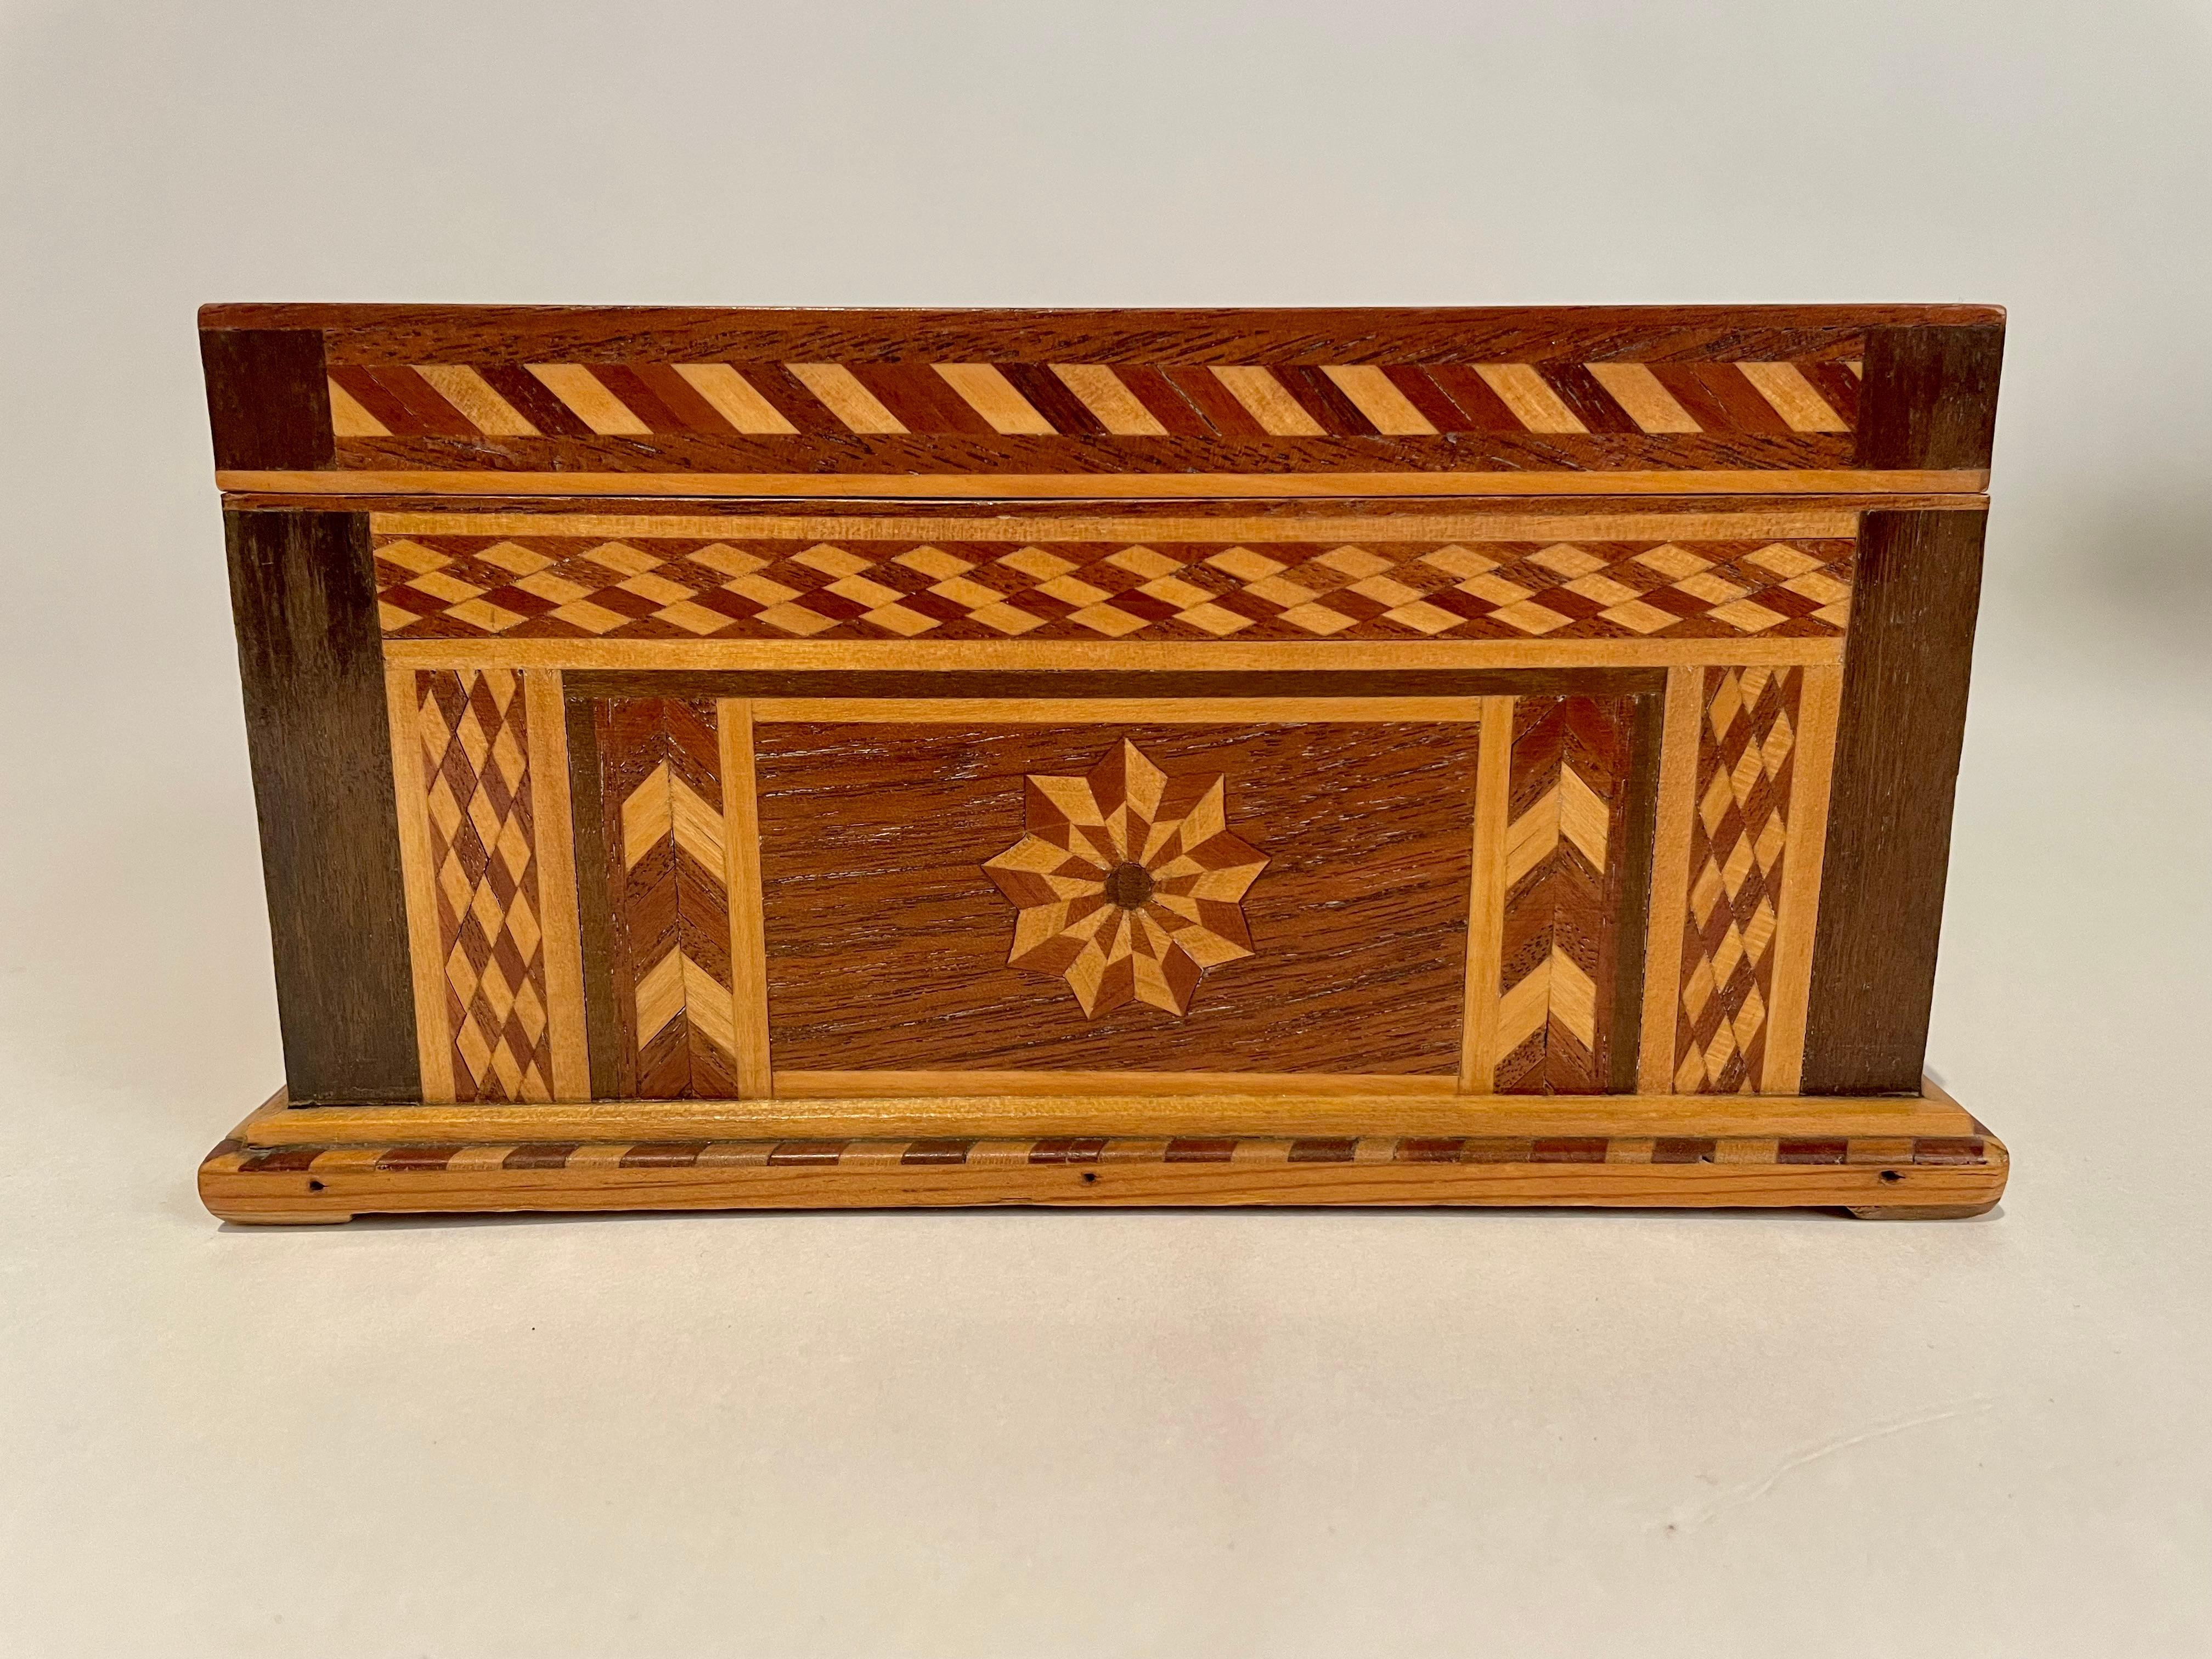 Arts and Crafts 19th C American Walnut Box With Geometric And Starburst Fruitwood Inlay